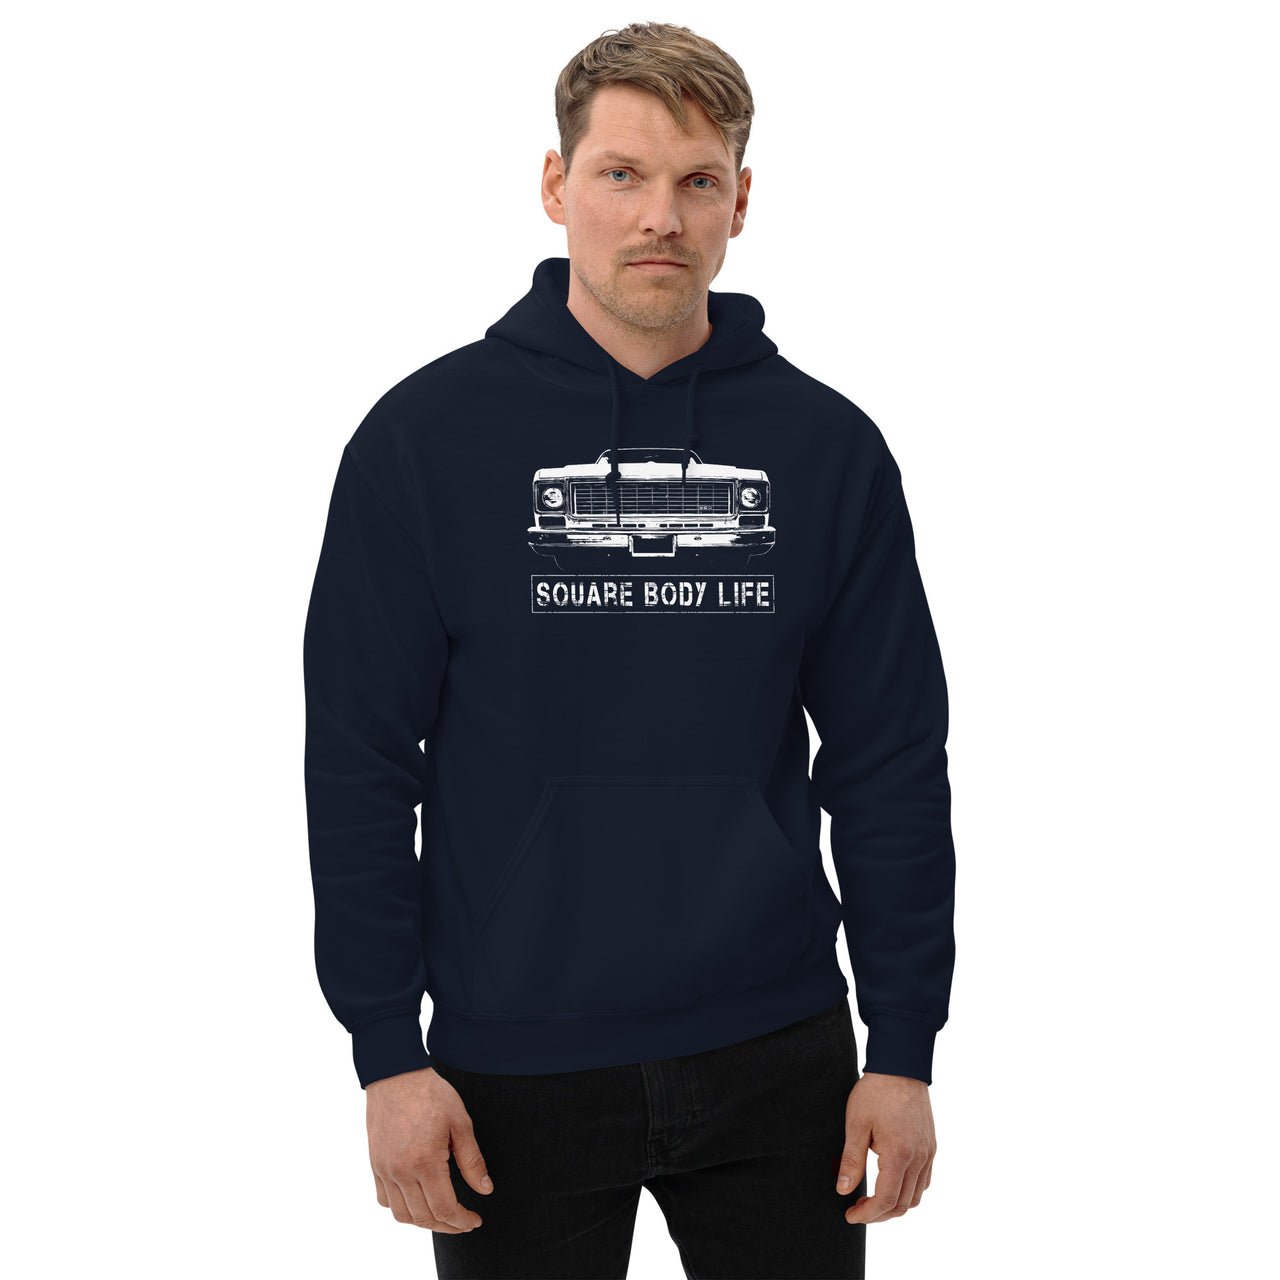 73-75 Square Body Hoodie modeled in navy